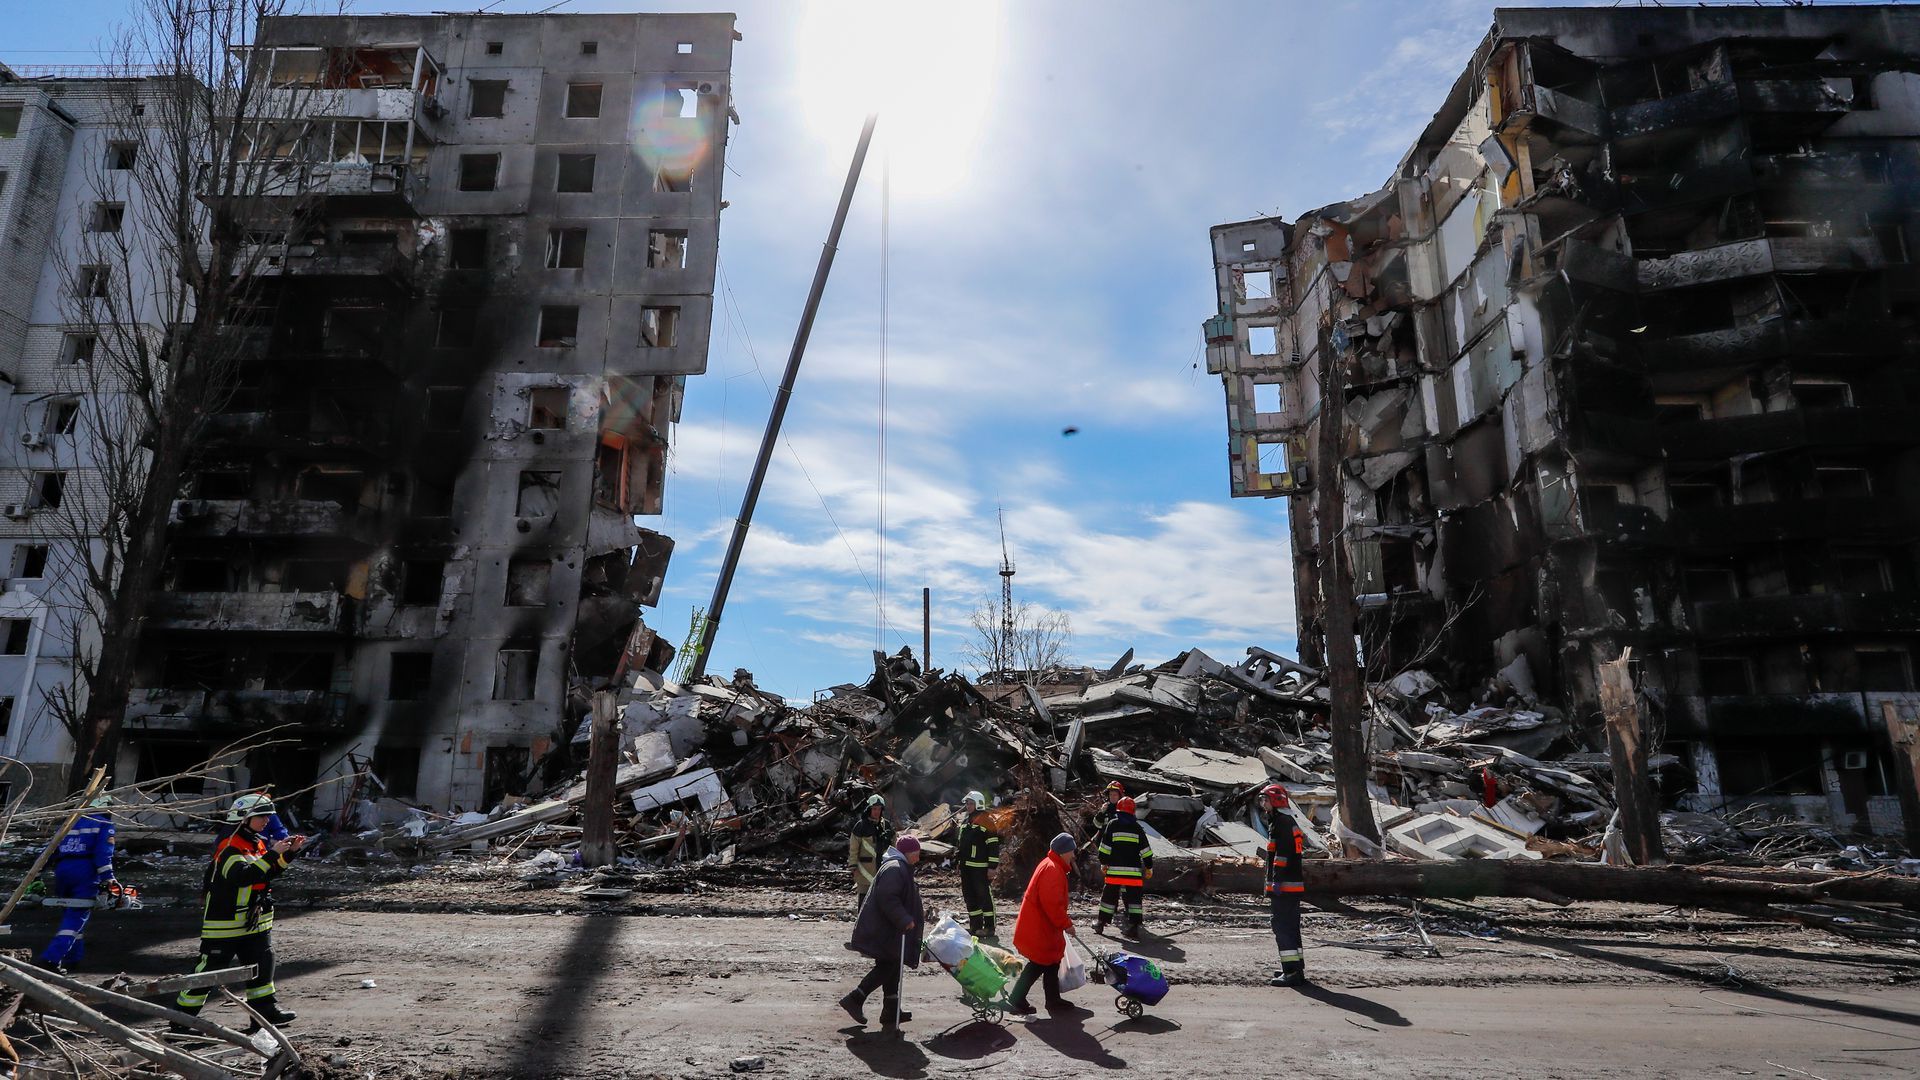 Local residents walk past a residential building damaged by the Russian air raids in Borodyanka, Ukraine, on April 7. Photo: Ceng Shou Yi/NurPhoto via Getty Images